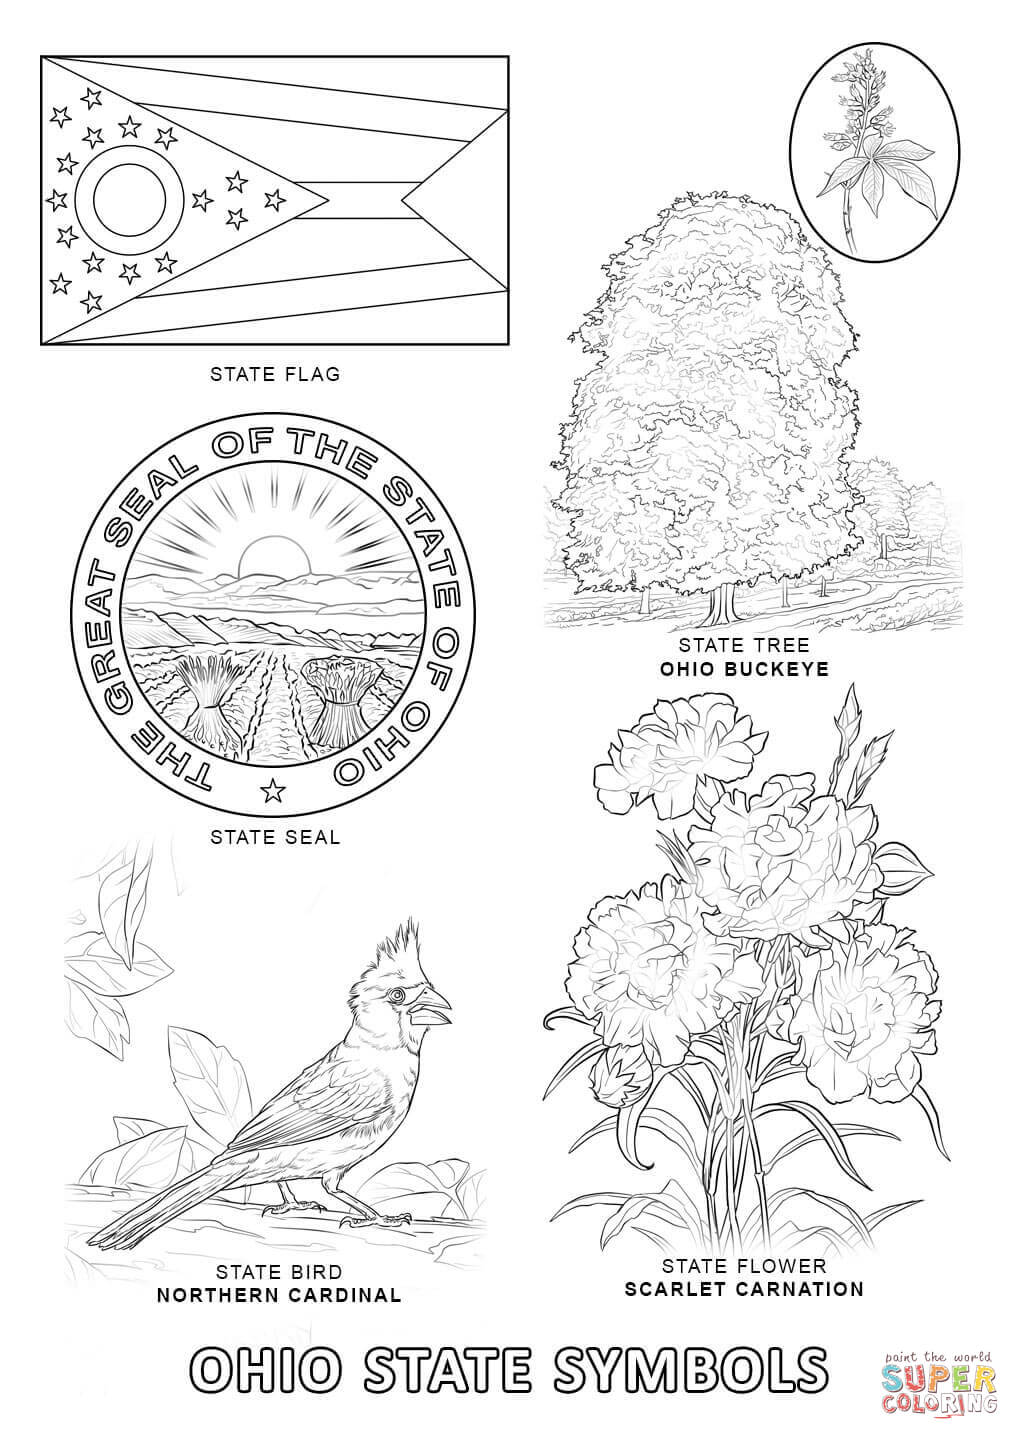 Ohio State Symbols coloring page | Free Printable Coloring Pages